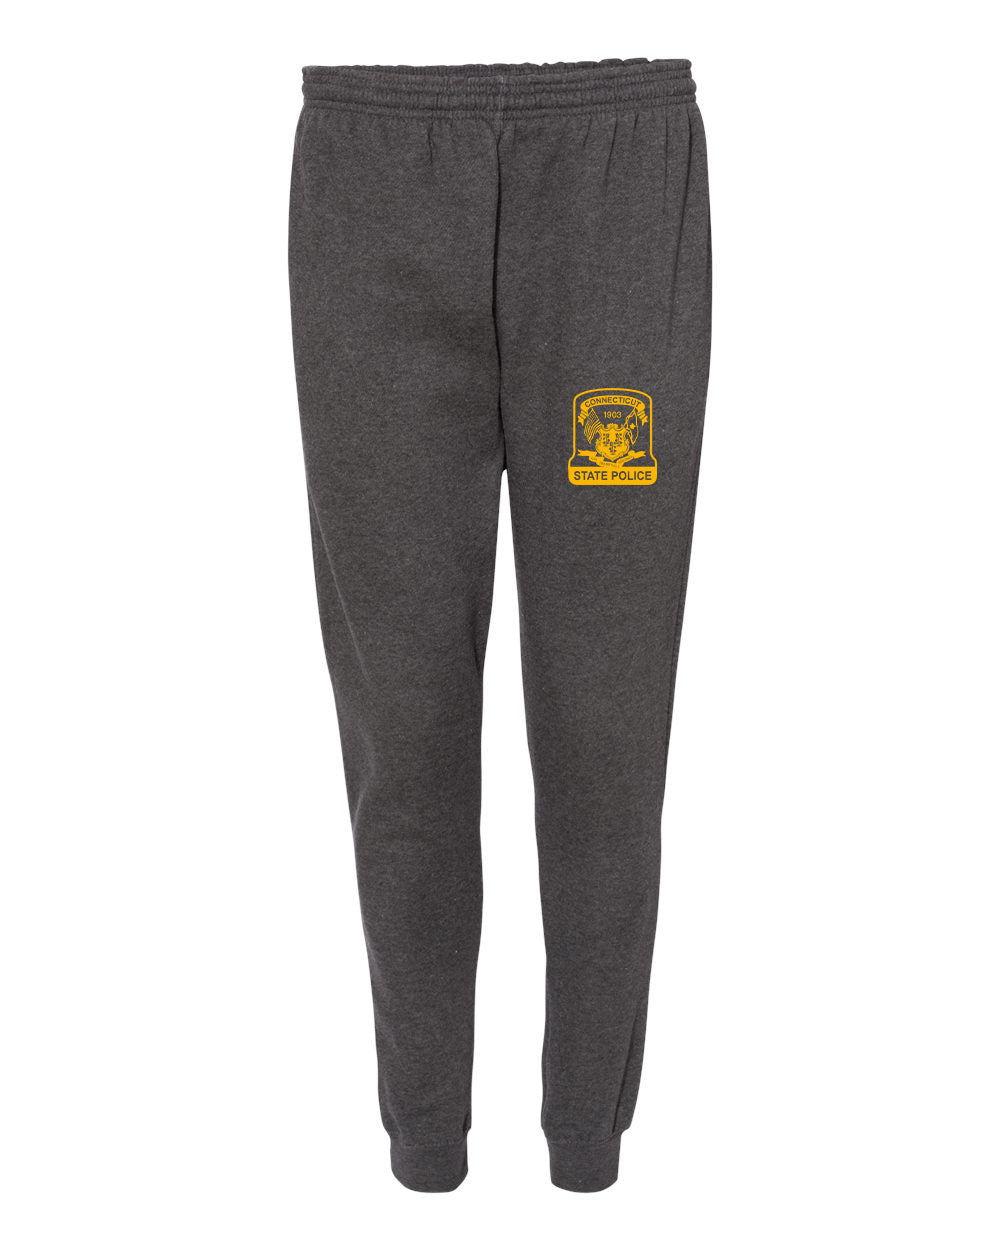 CTSP Adult Badger Joggers - 1215 (color options available)